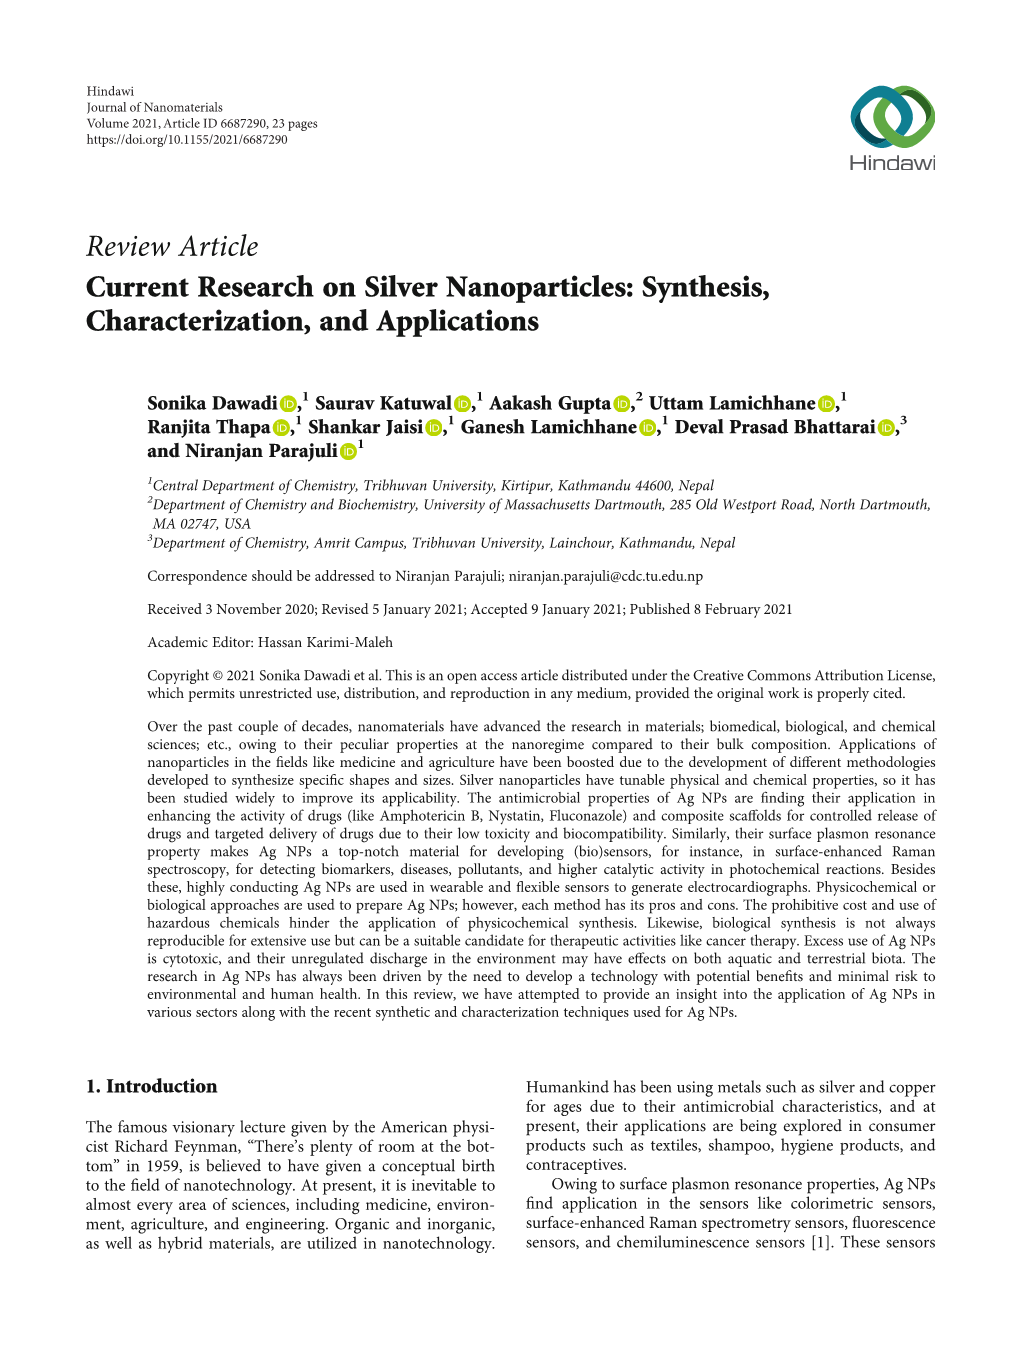 Current Research on Silver Nanoparticles: Synthesis, Characterization, and Applications